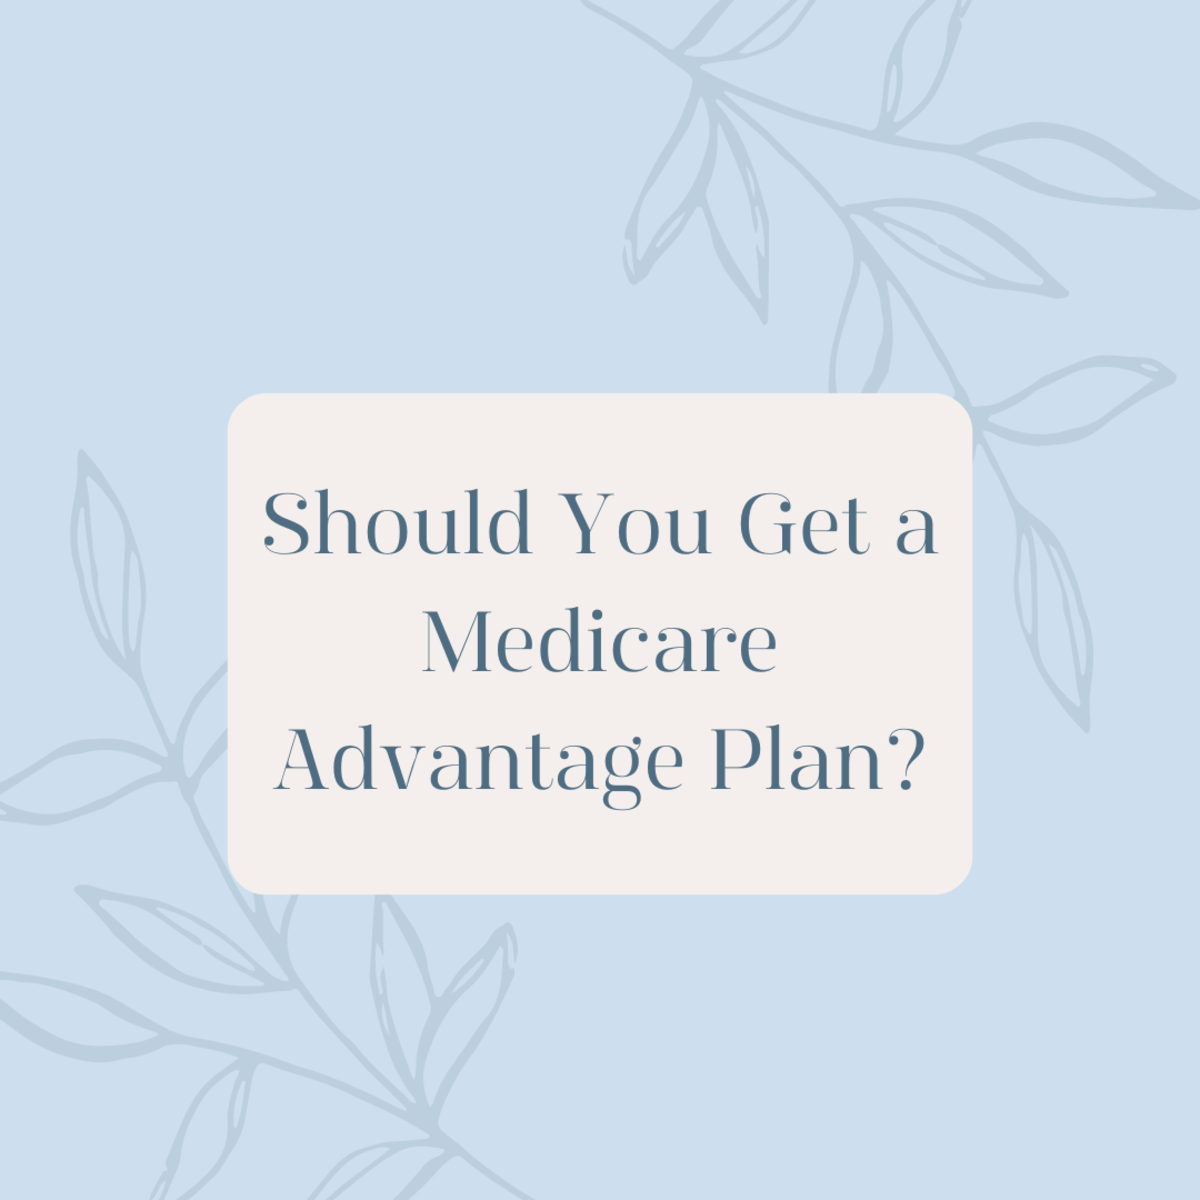 Beware of Problems With Medicare Advantage Plans